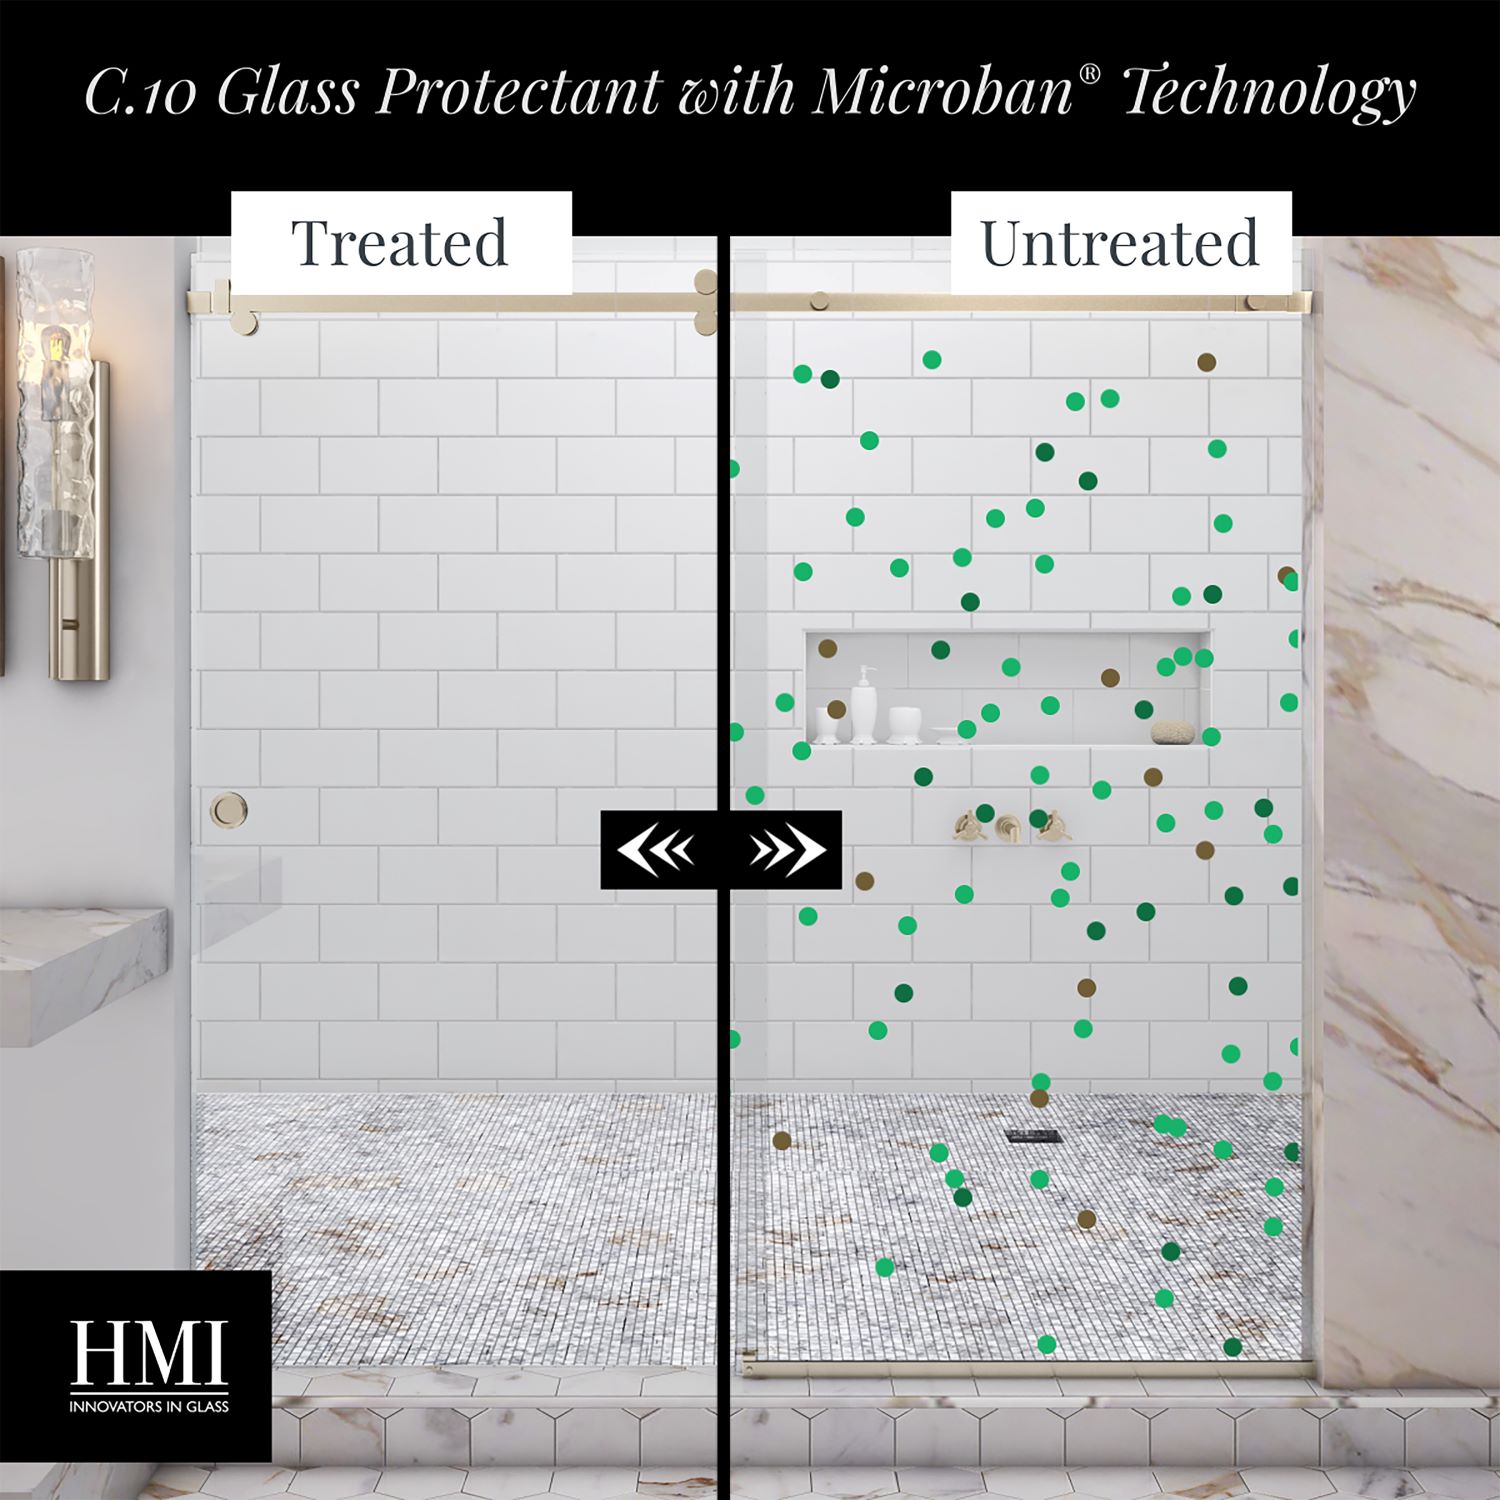 Treated and untreated shower enclosure showing benefit of protective antimicrobial glass coating